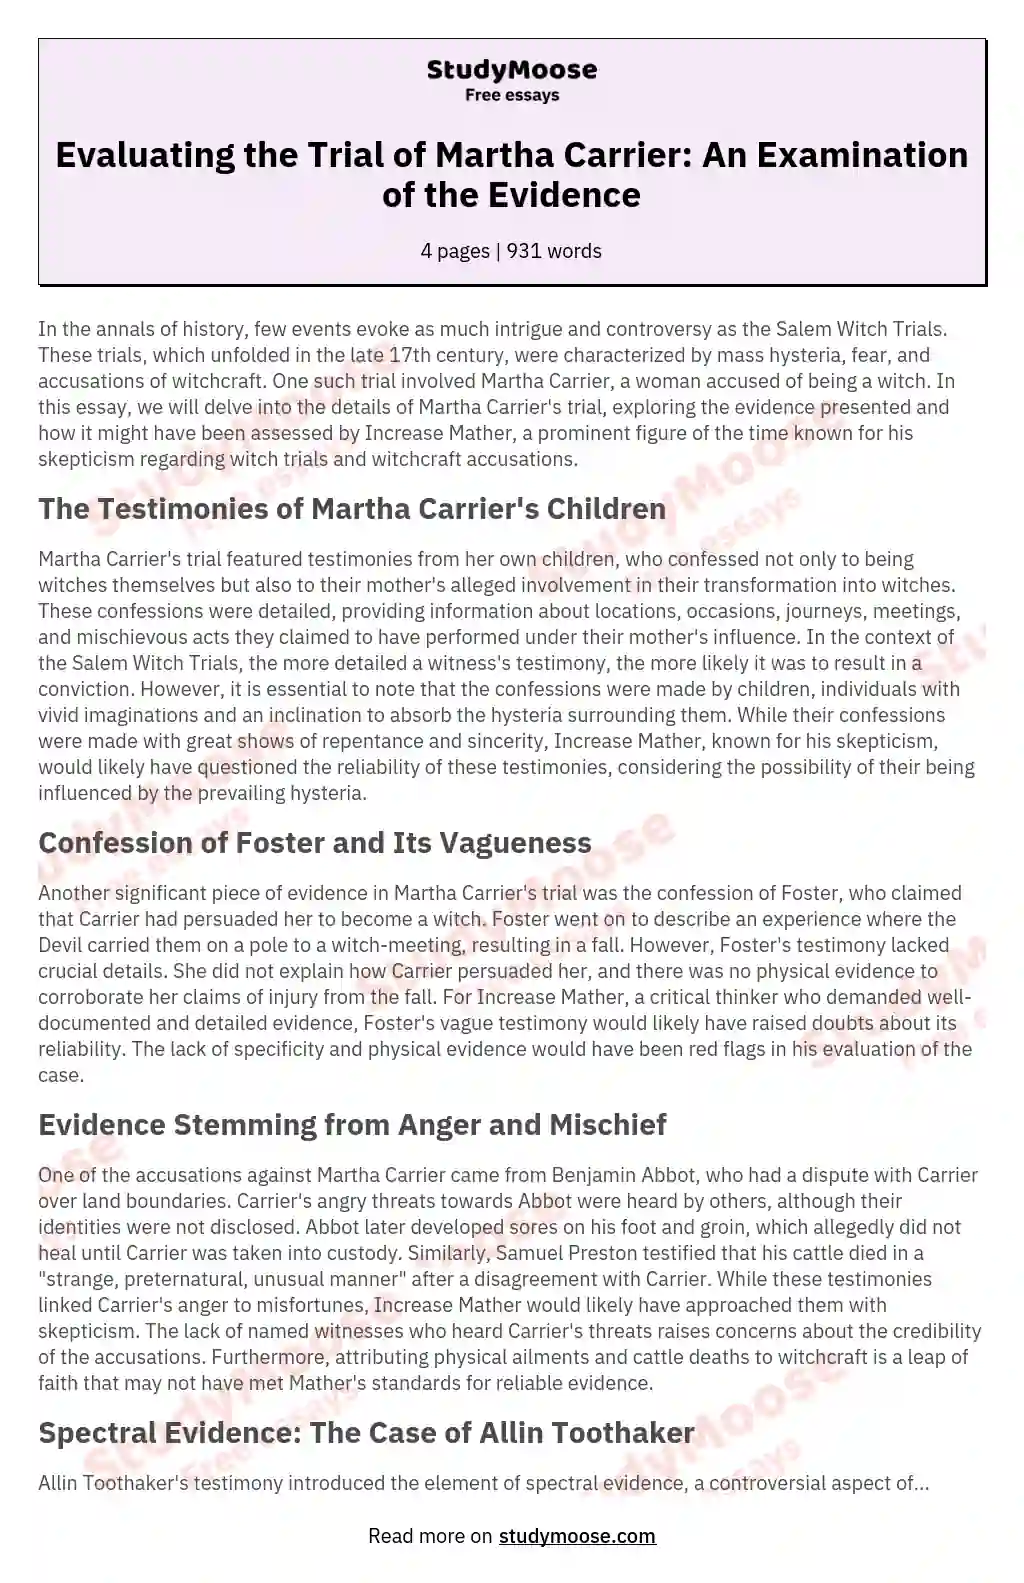 Evaluating the Trial of Martha Carrier: An Examination of the Evidence essay